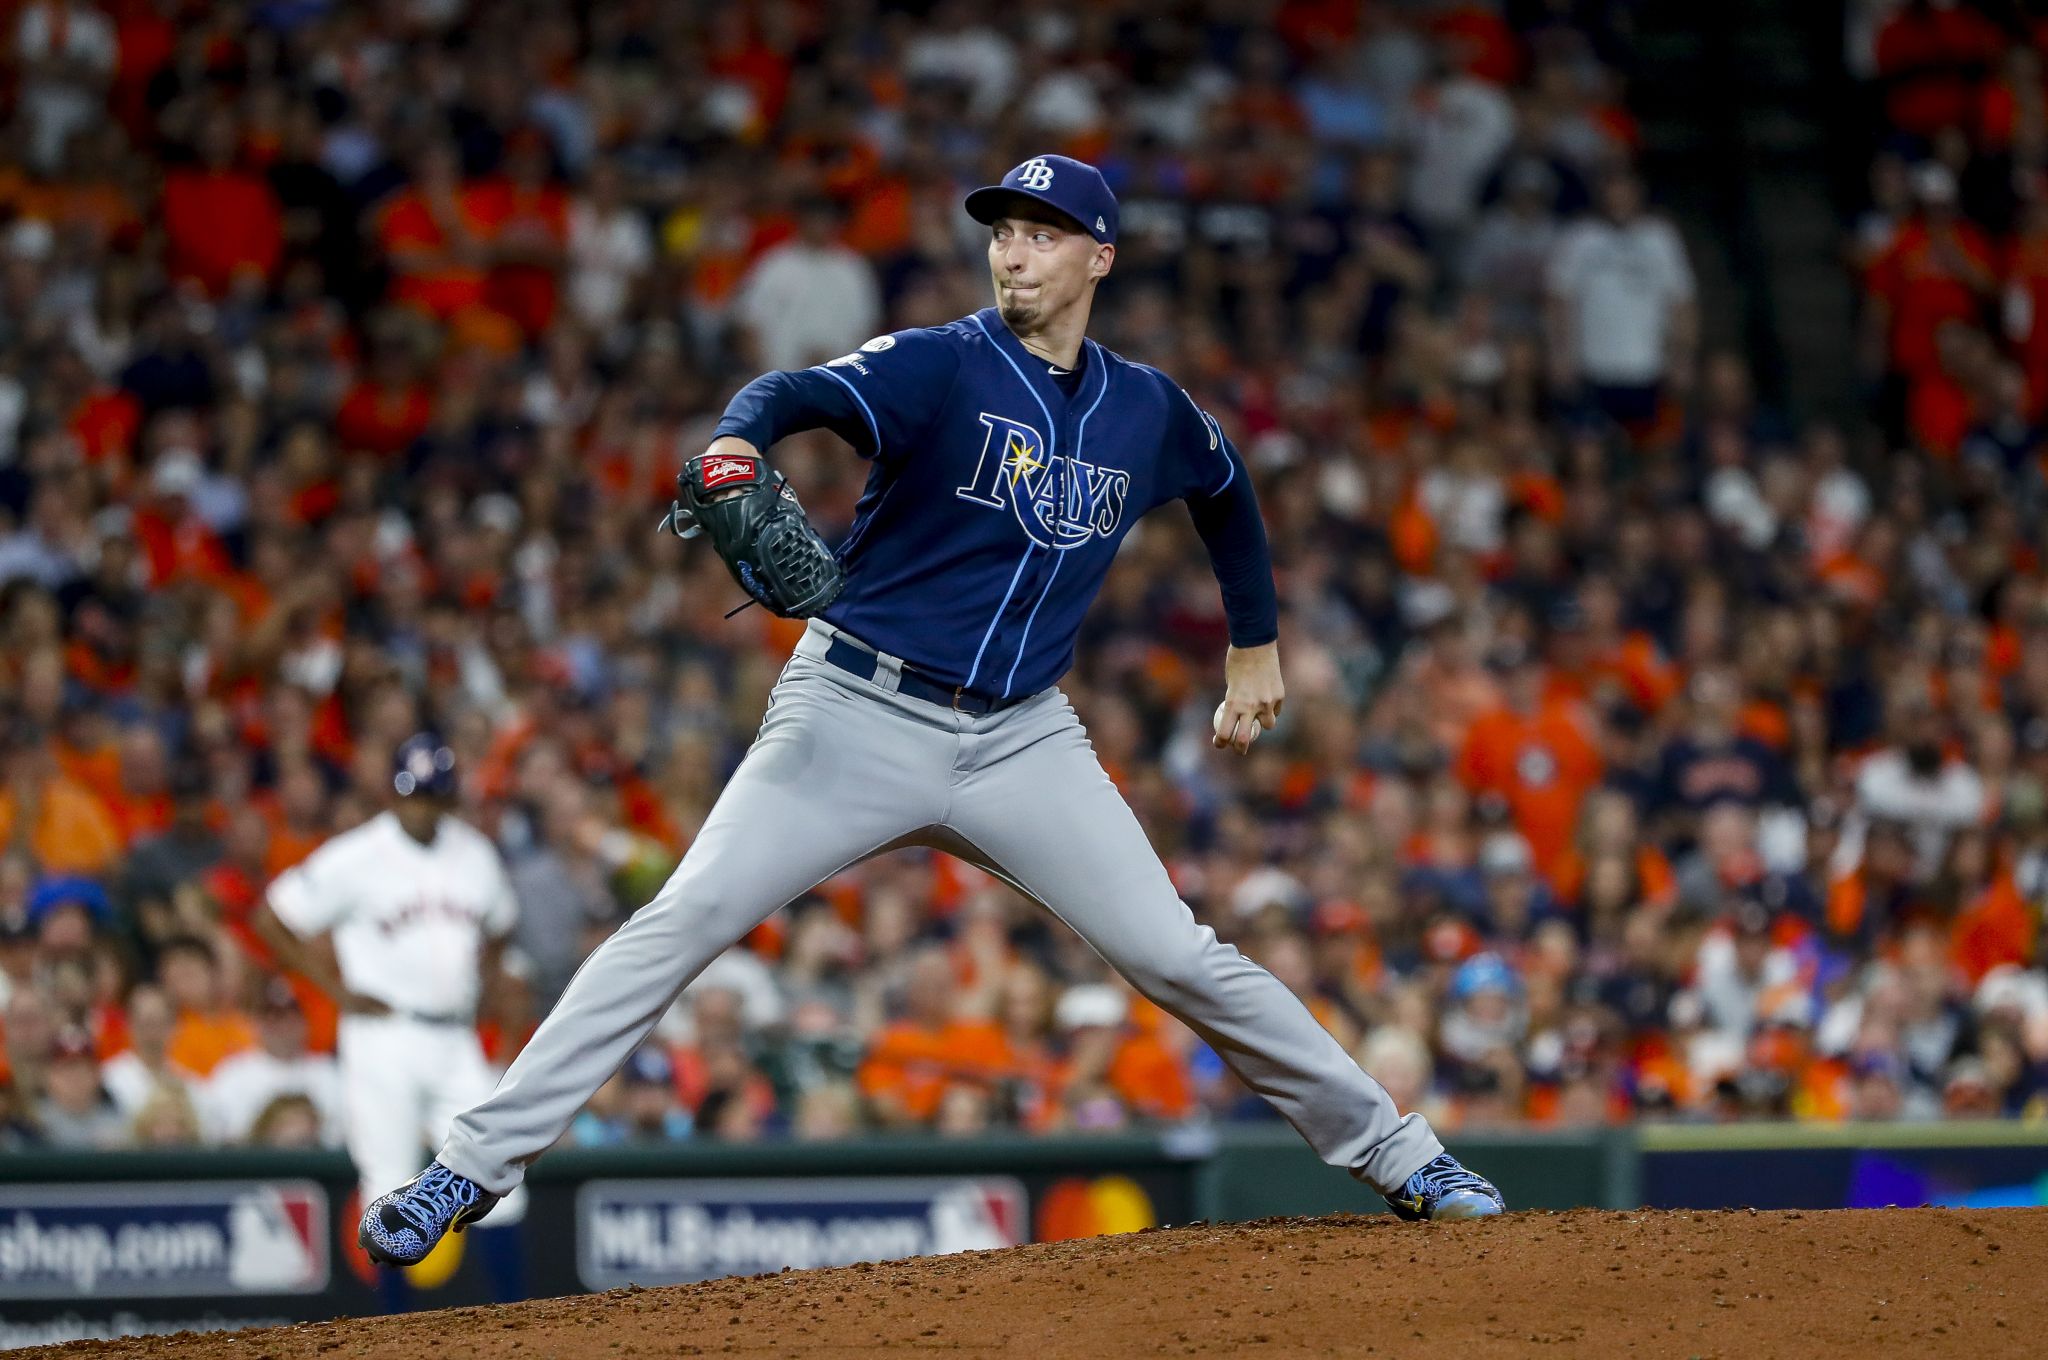 Padres' Blake Snell dominates Rays, his former team - The Boston Globe